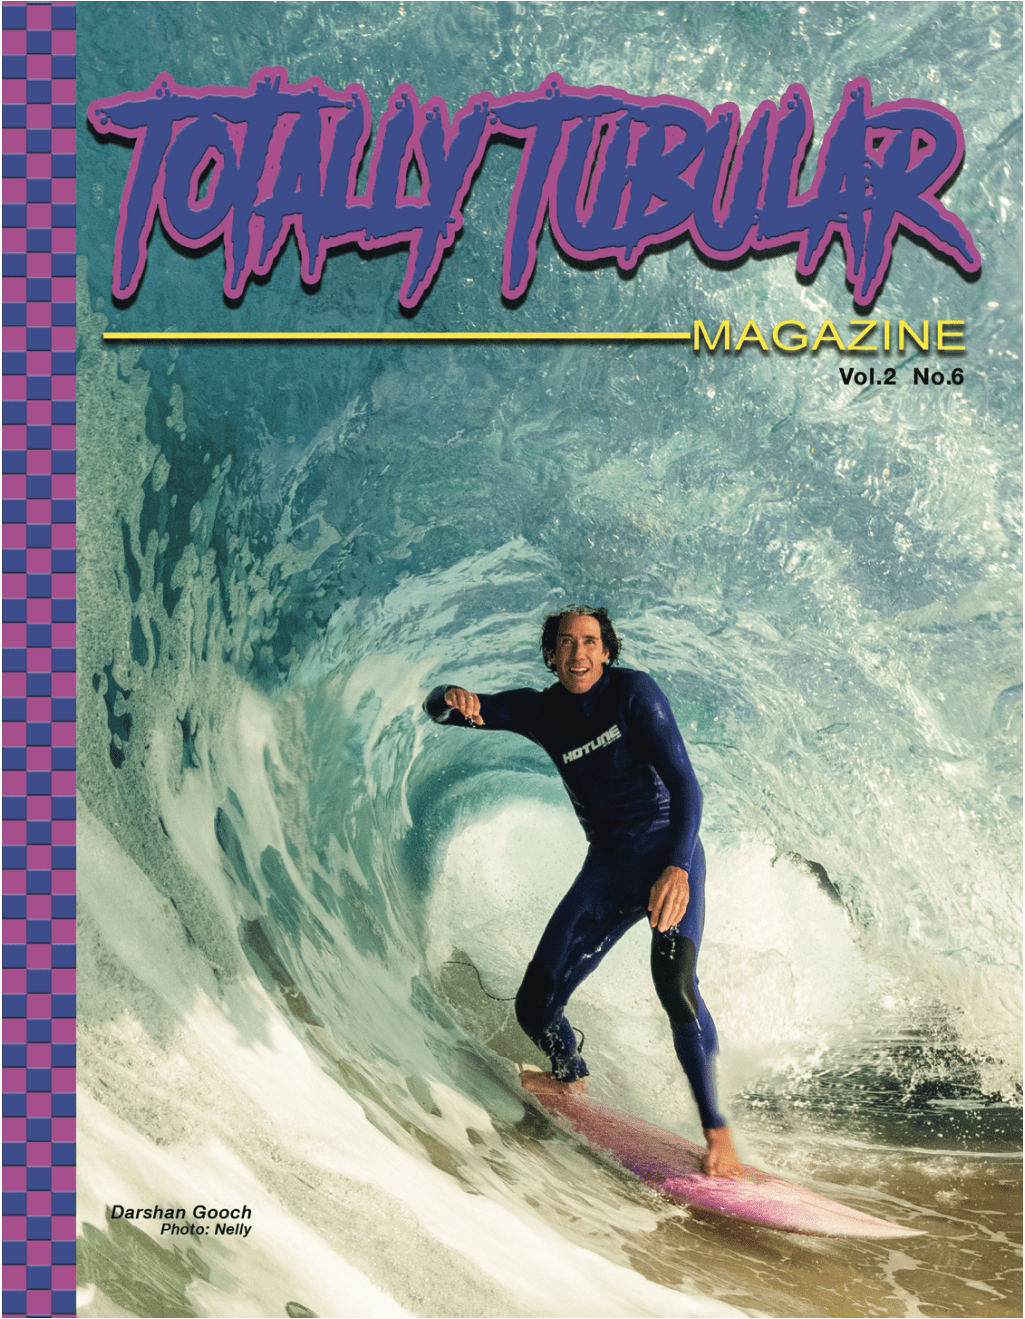 Totally Tubular Magazine Issue 6 cover